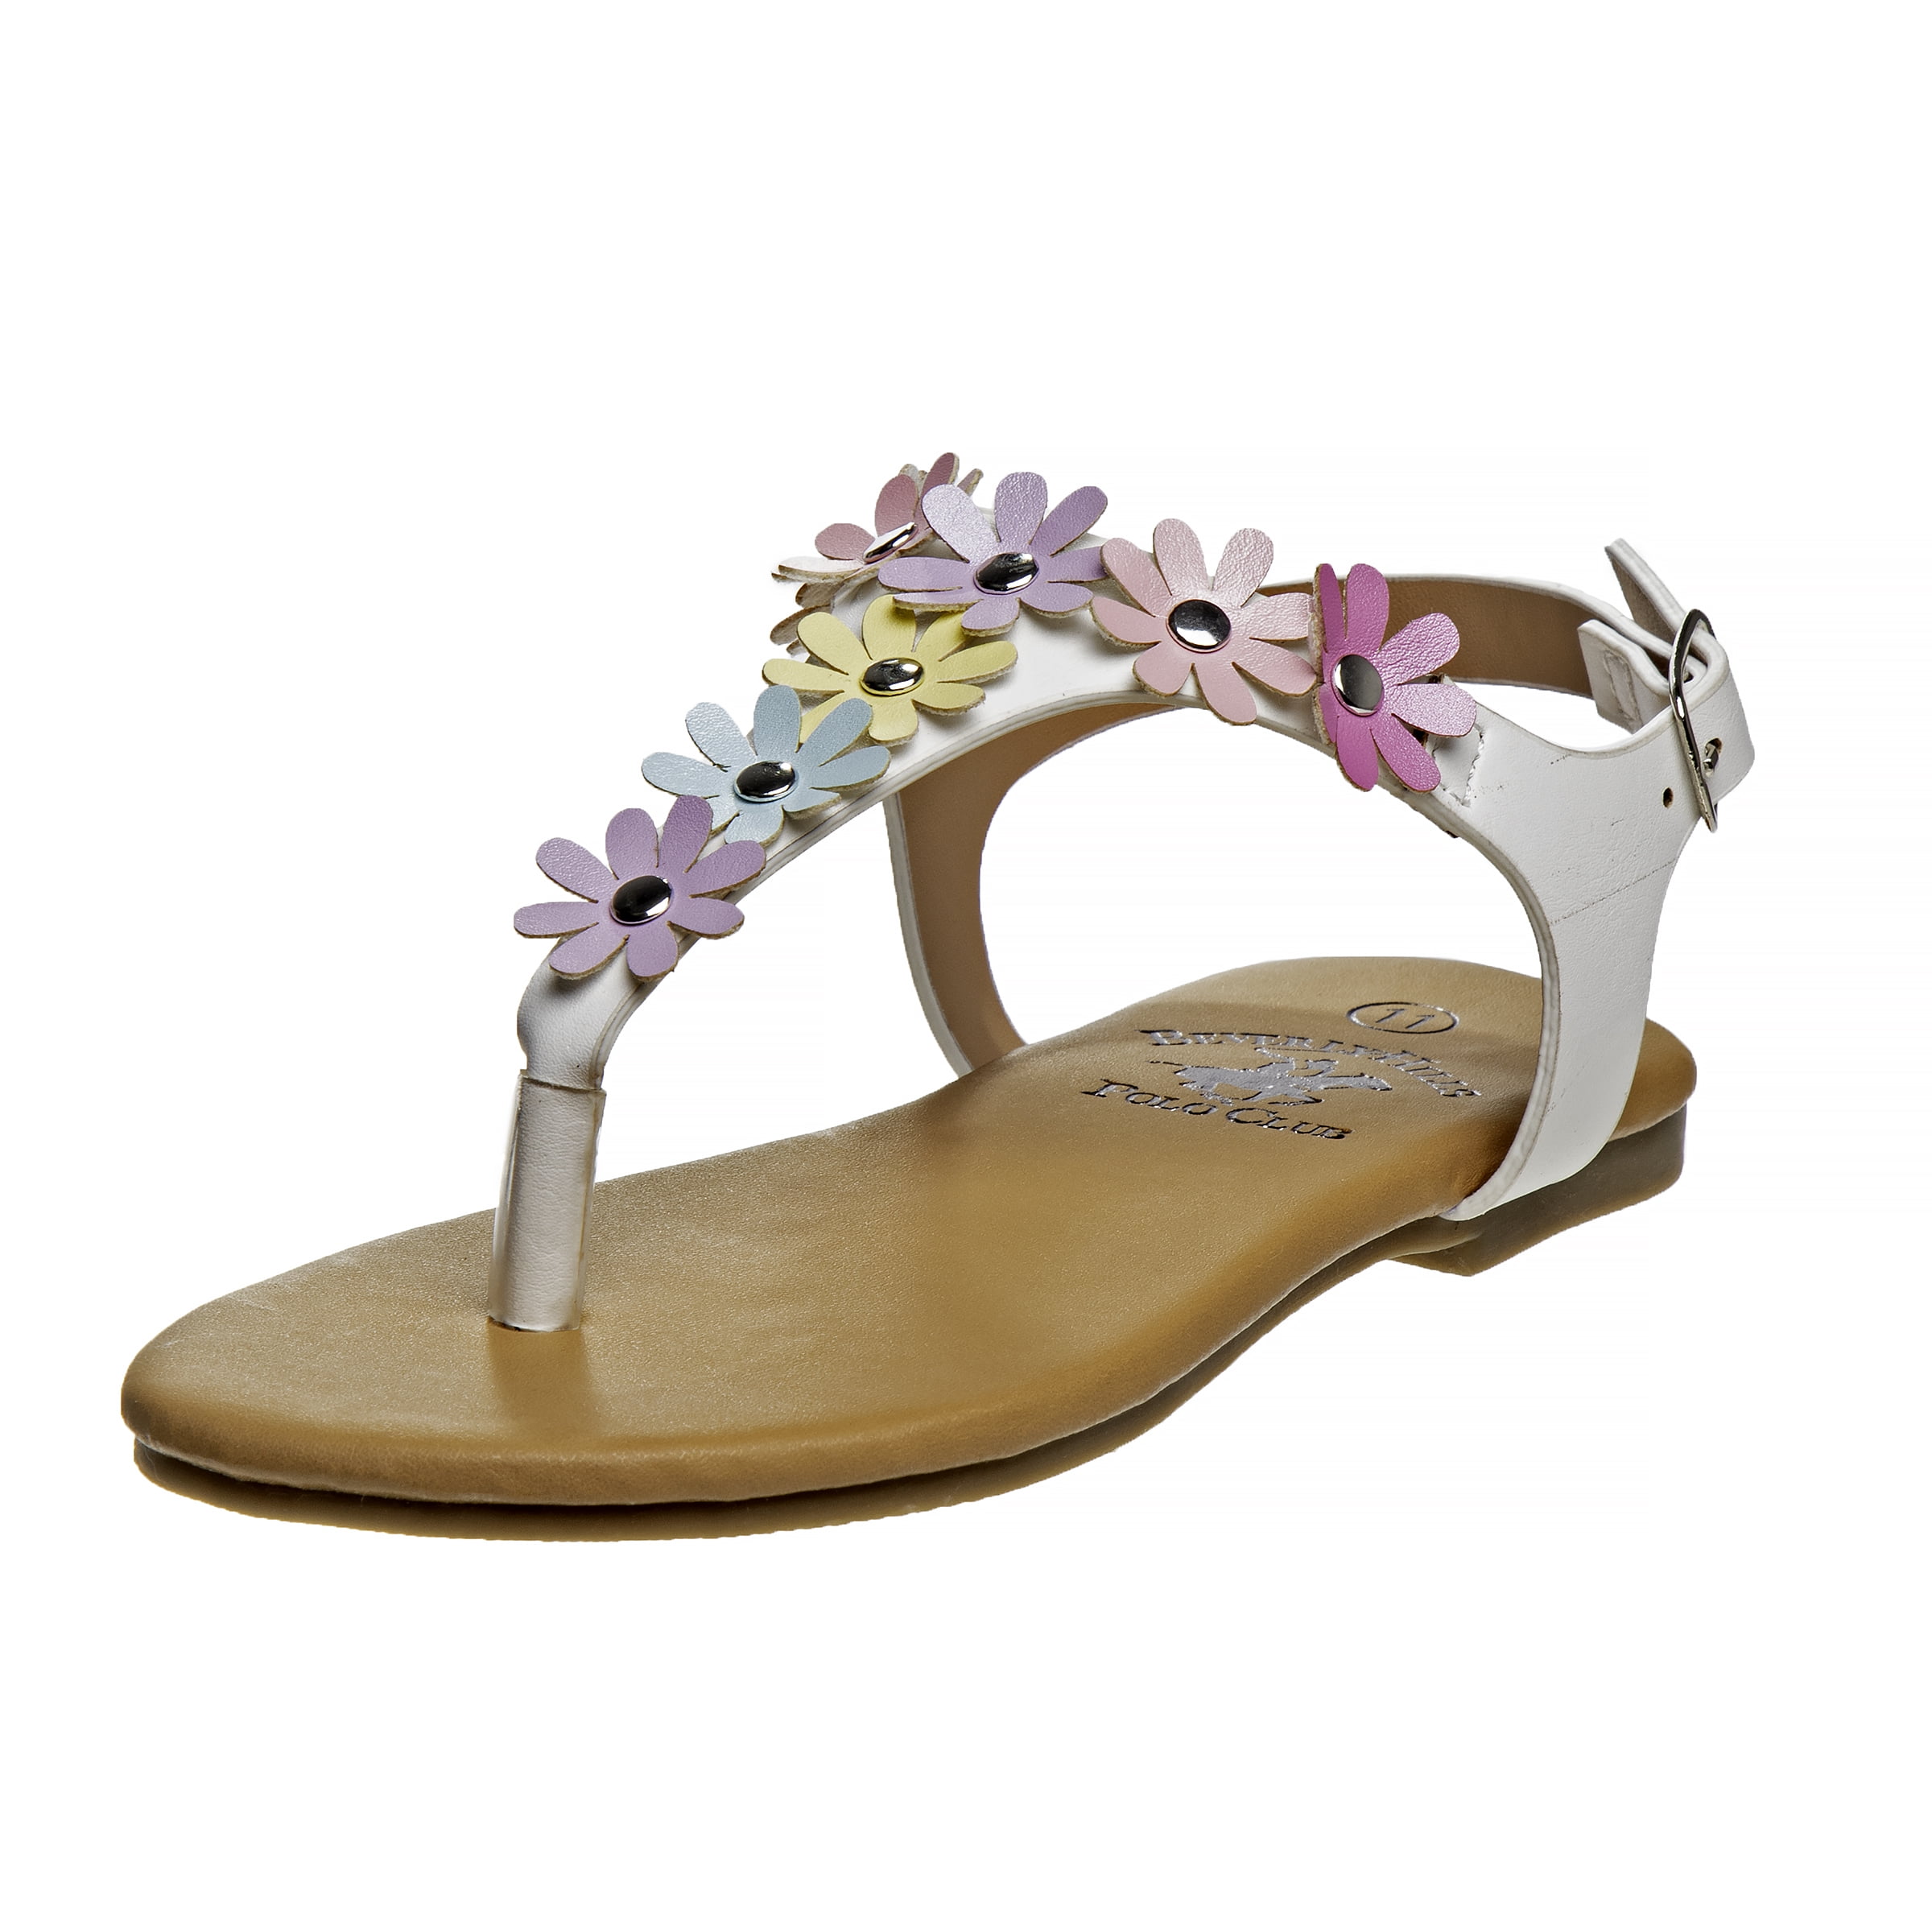 Beverly Hills Polo Club Girls’ Sandals – Strappy Thong Sandals with ...